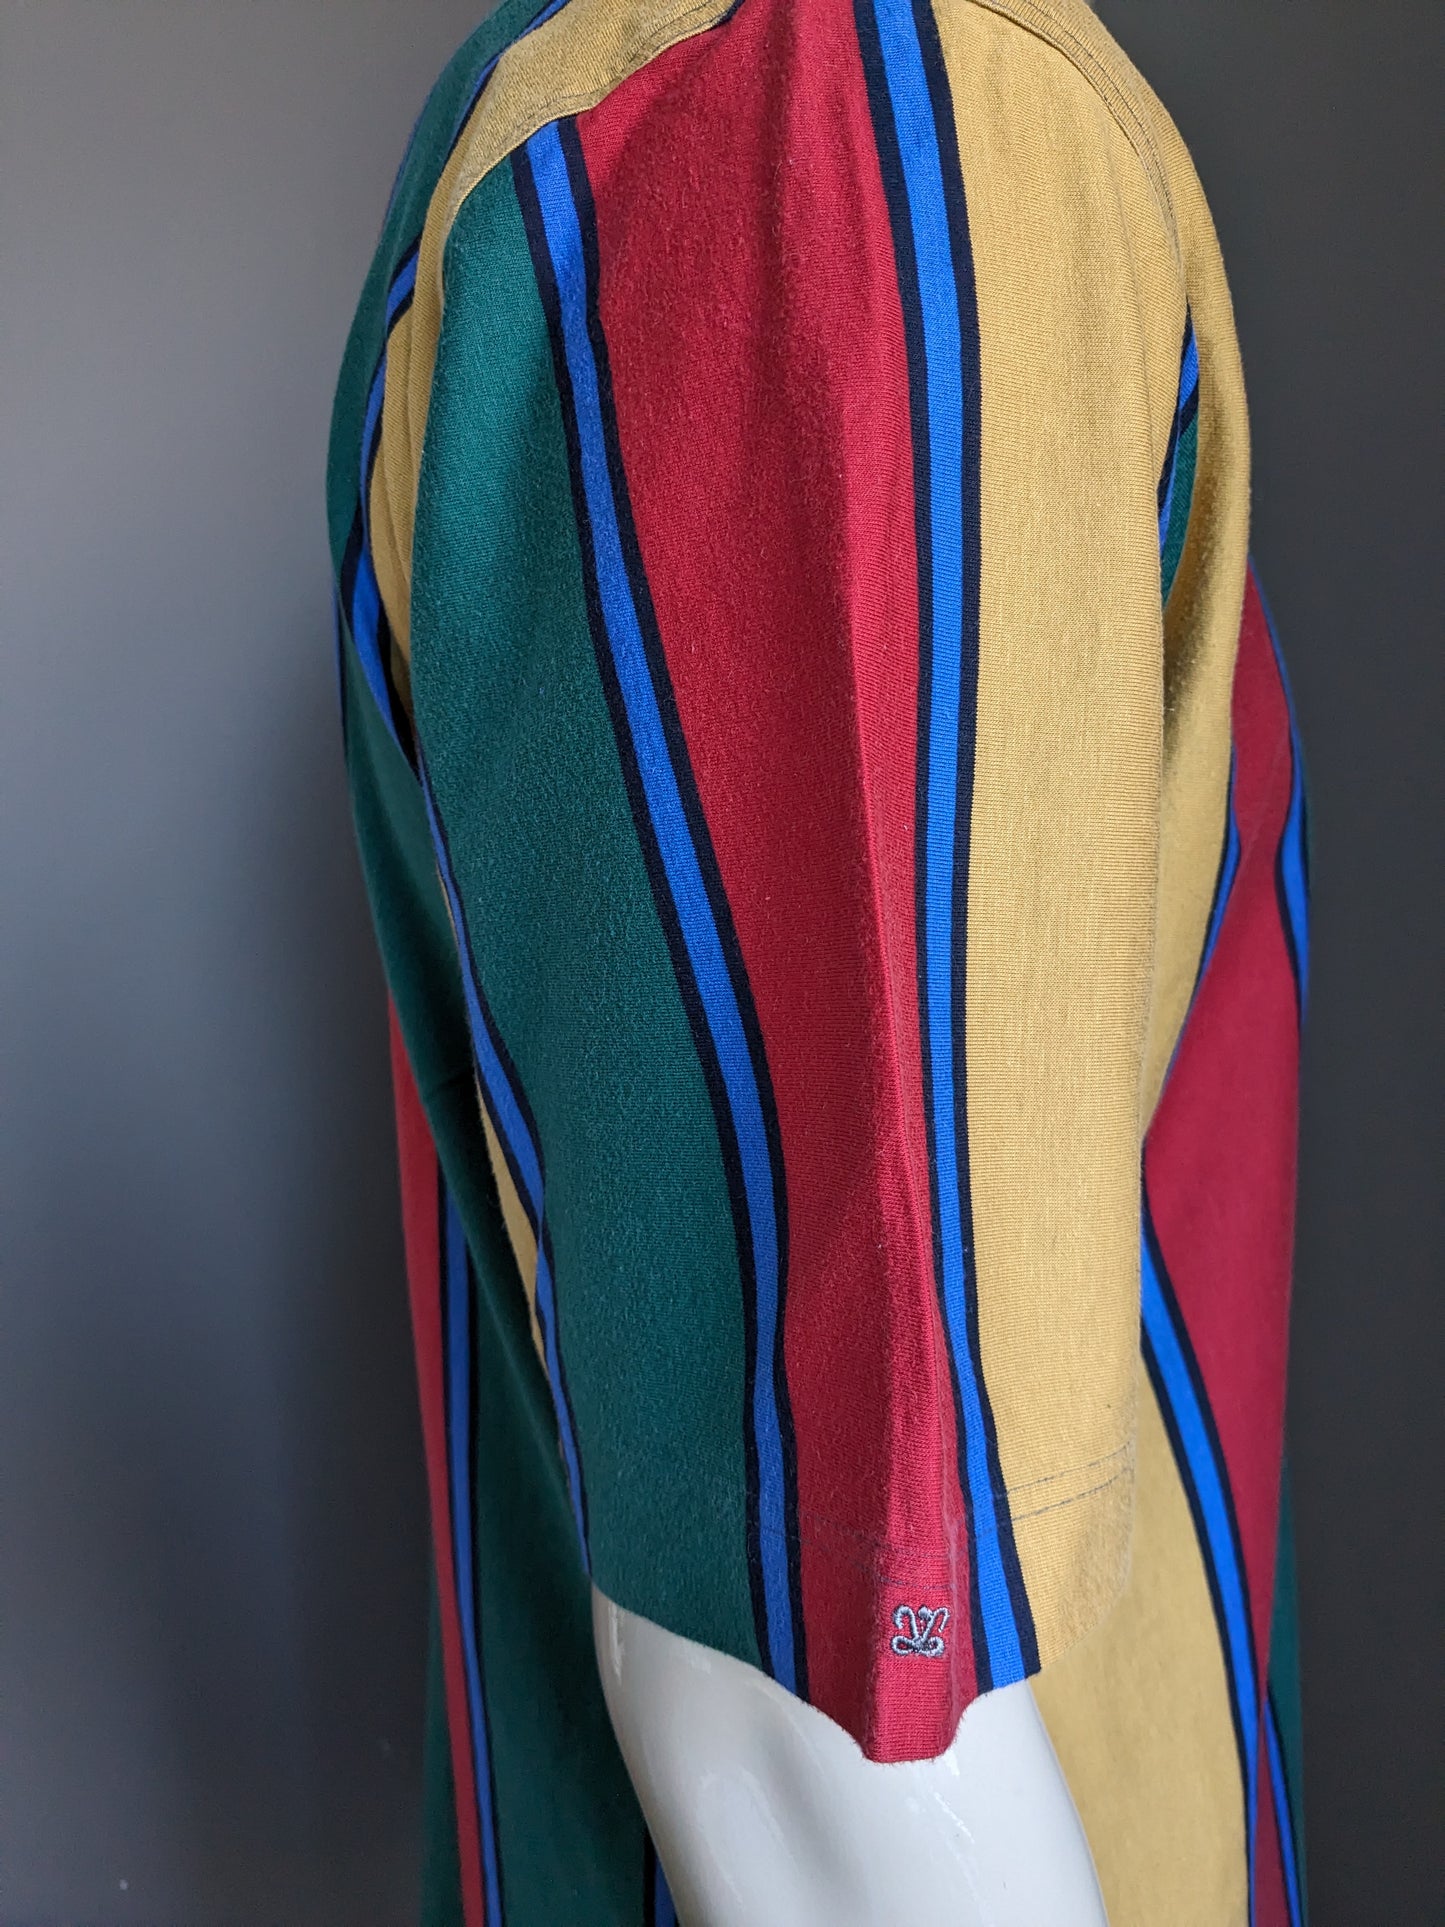 Vintage from Laack Royal Polo. Red blue green yellow striped. Size L.